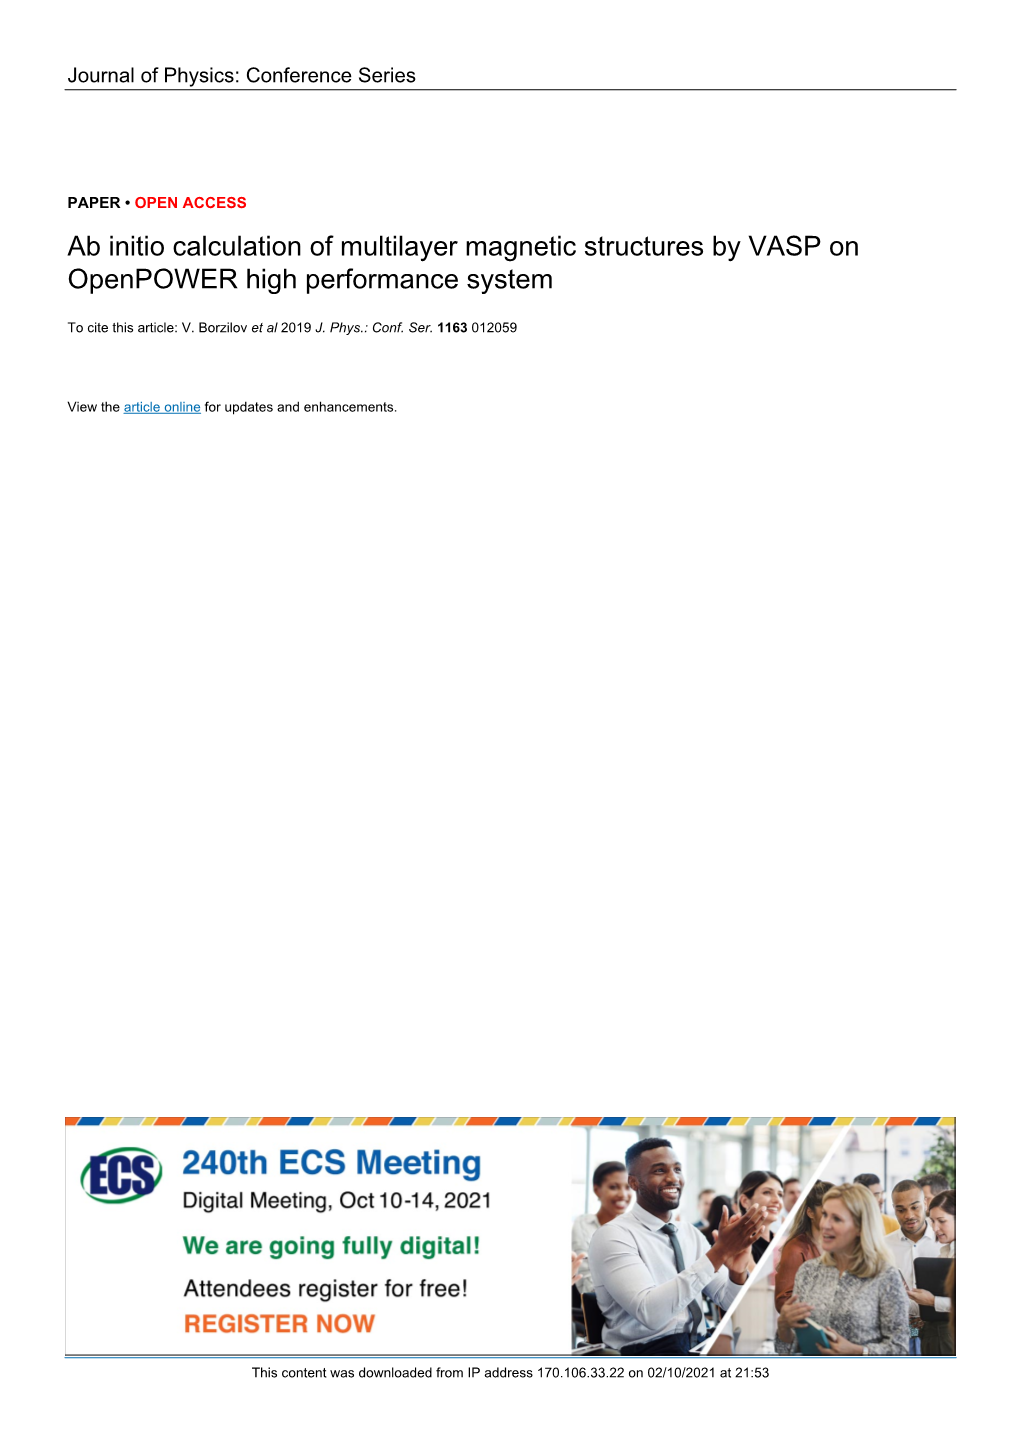 Ab Initio Calculation of Multilayer Magnetic Structures by VASP on Openpower High Performance System